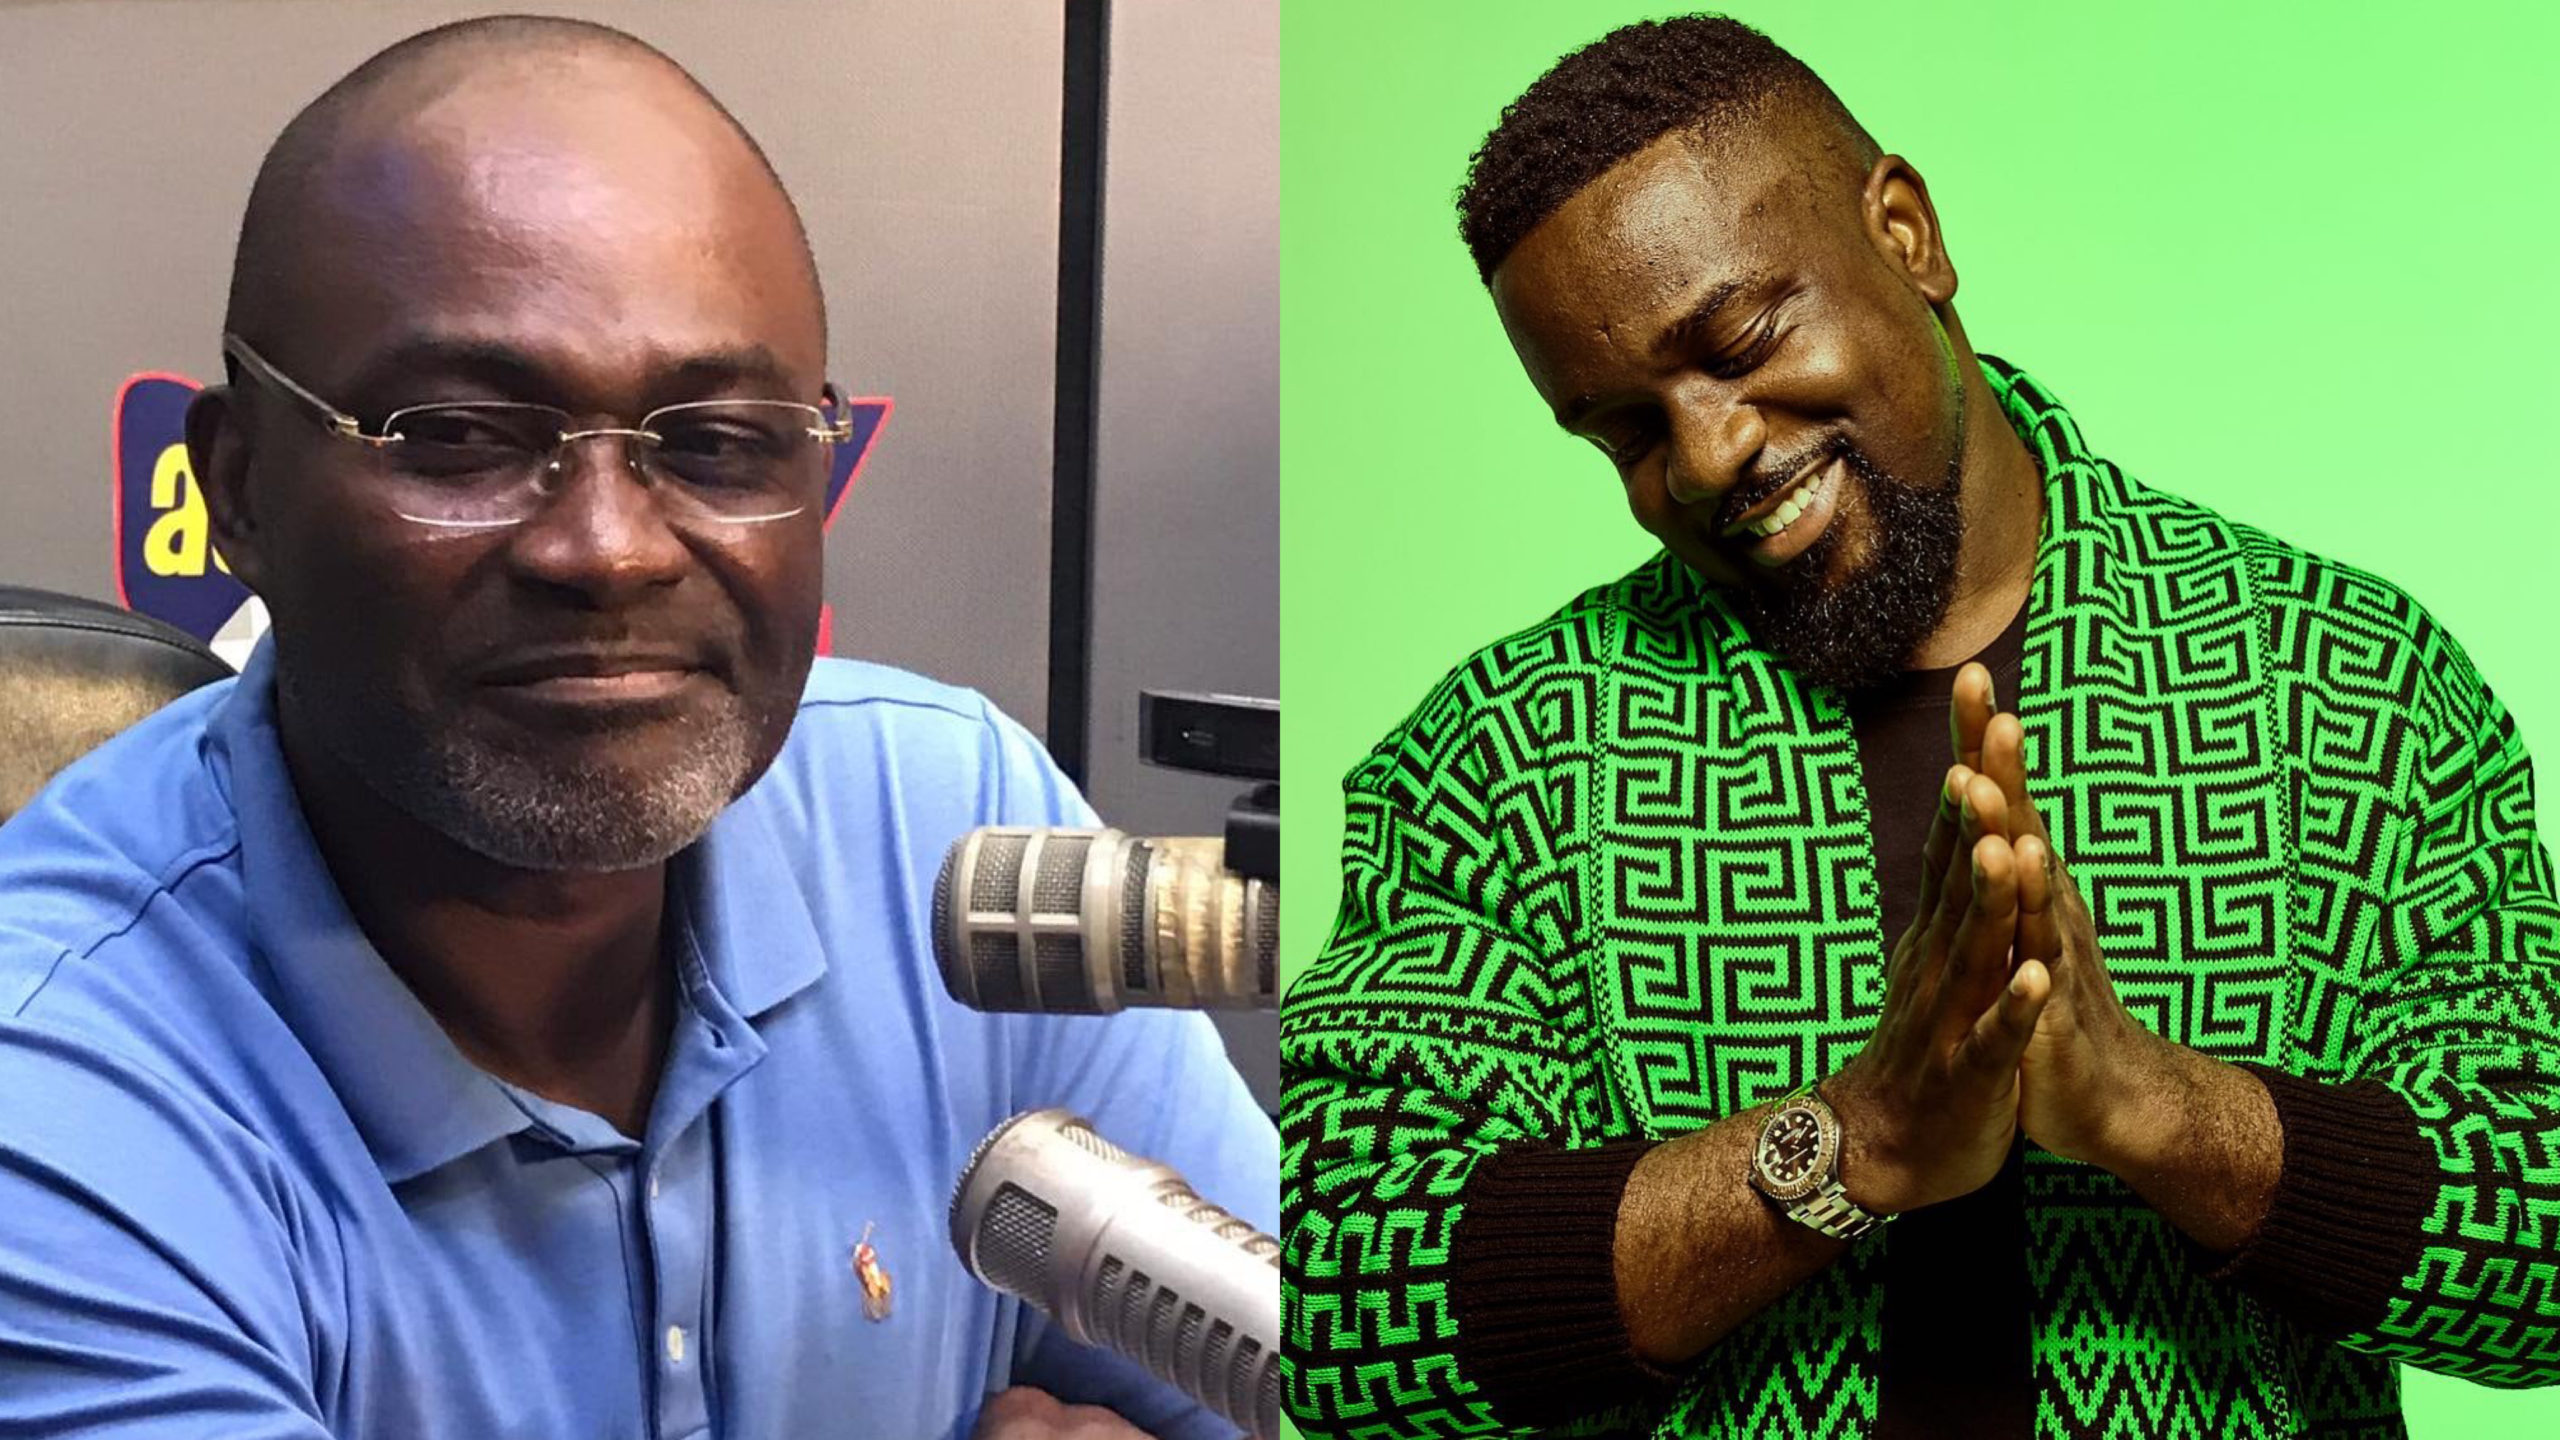 Kennedy Agyapong Lists His Top 5 Favorite Ghanaian Musicians, Sarkodie Is #1